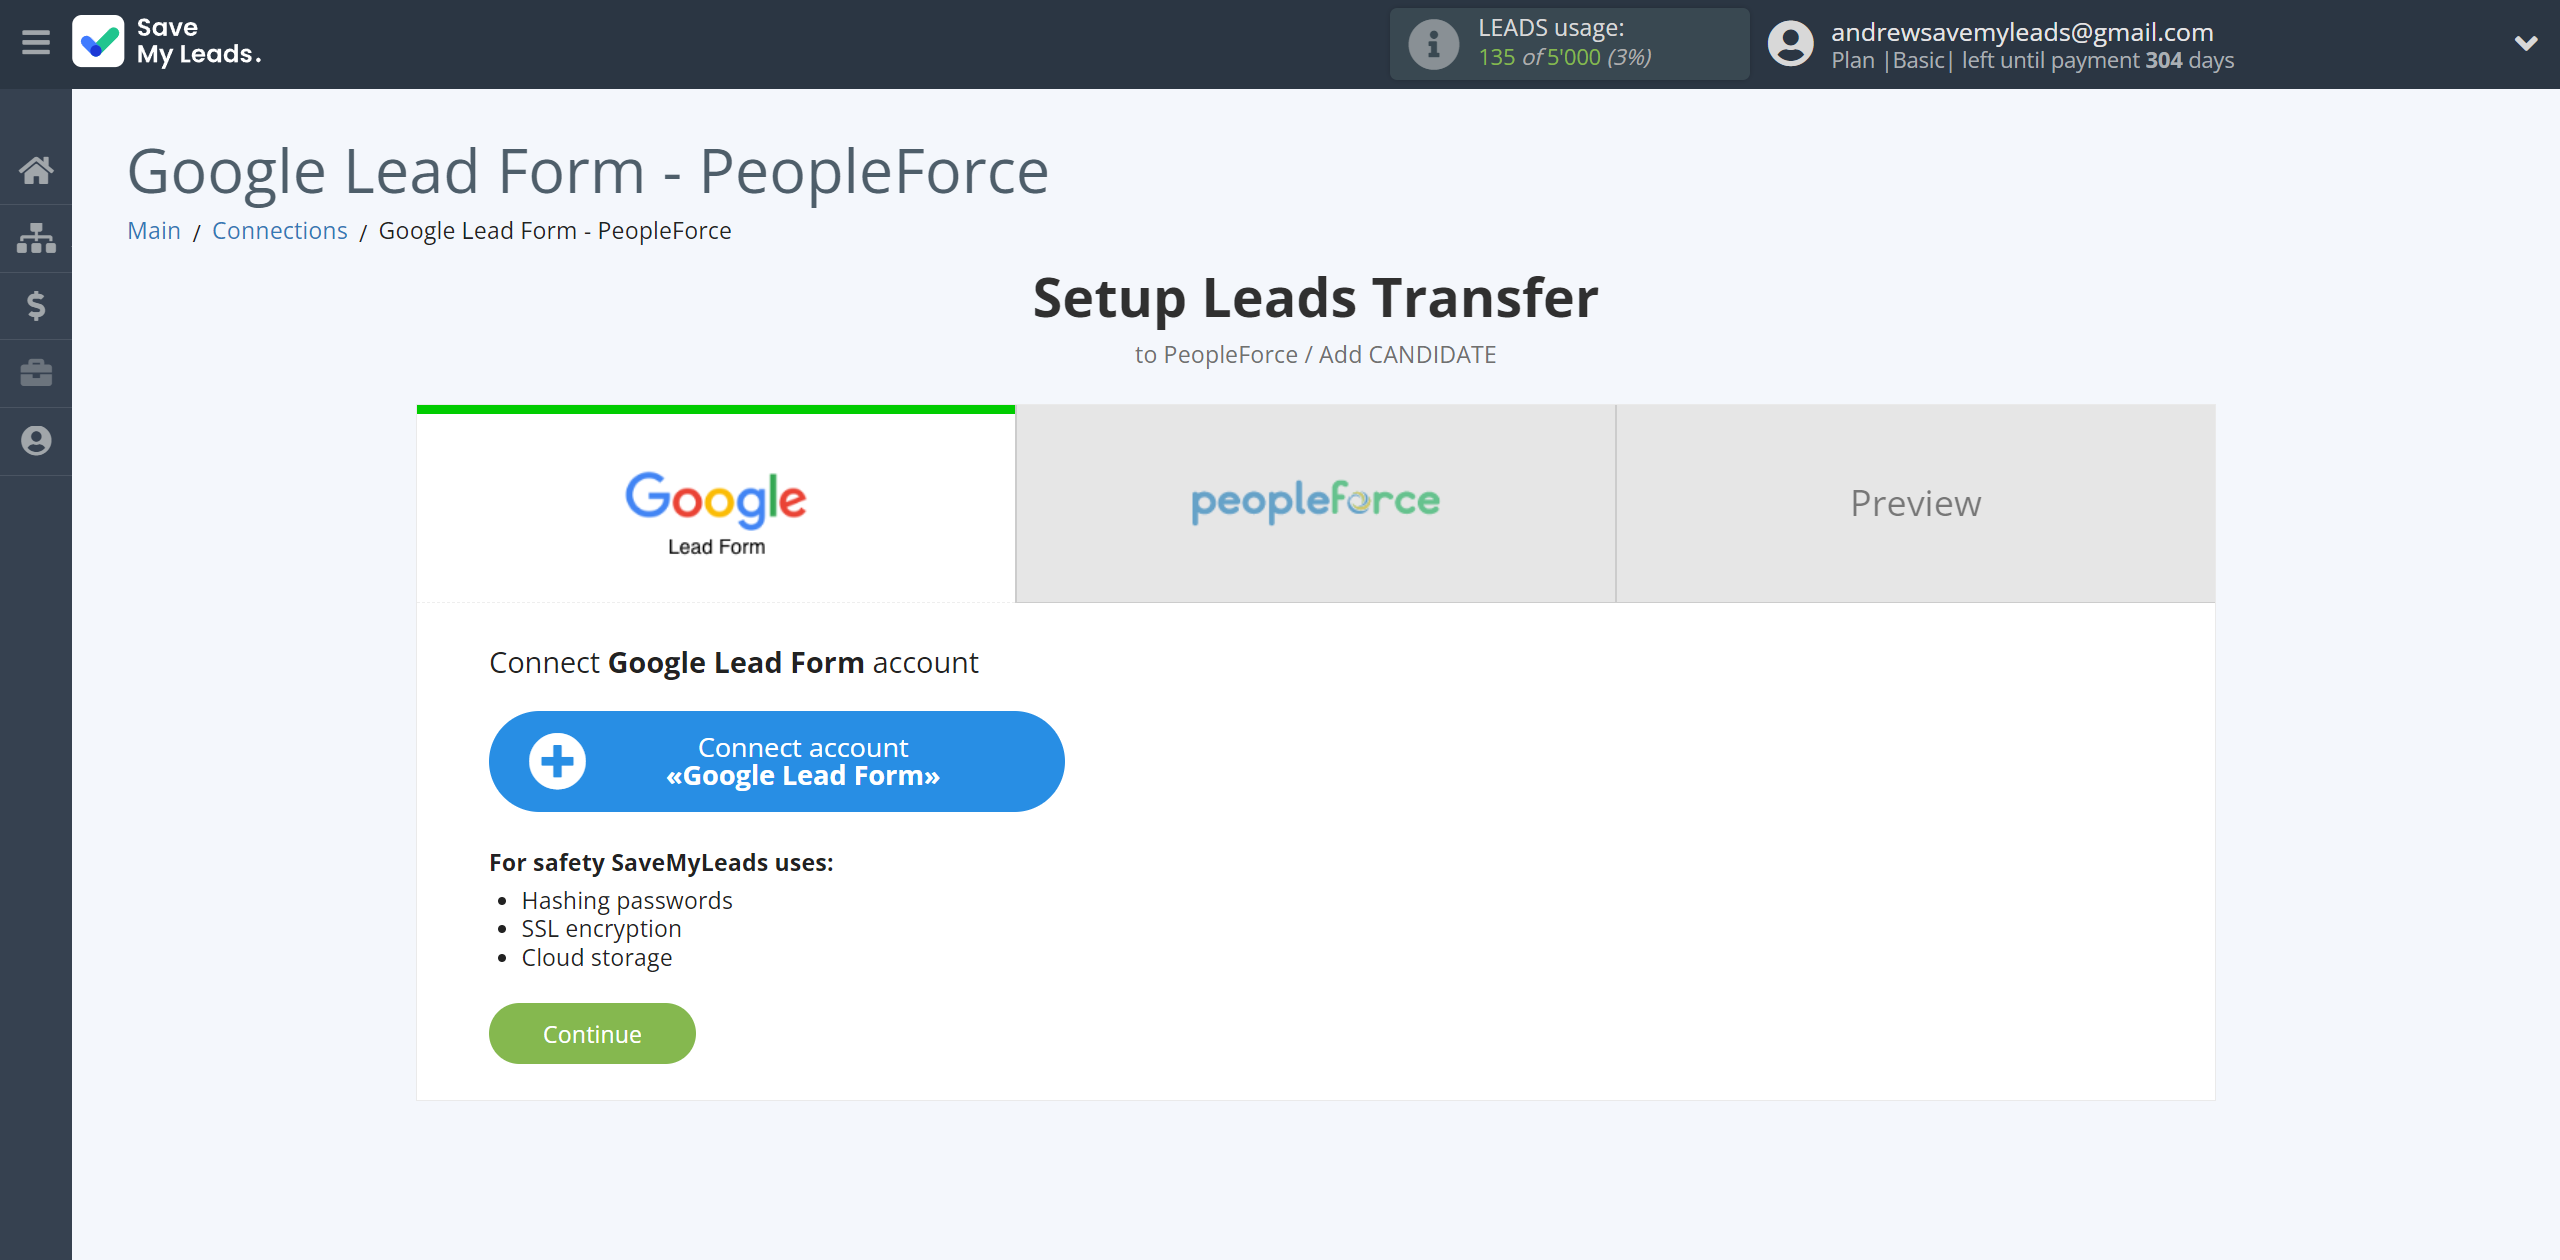 How to Connect Google Lead Form with PeopleForce Add Candidate | Data Source account